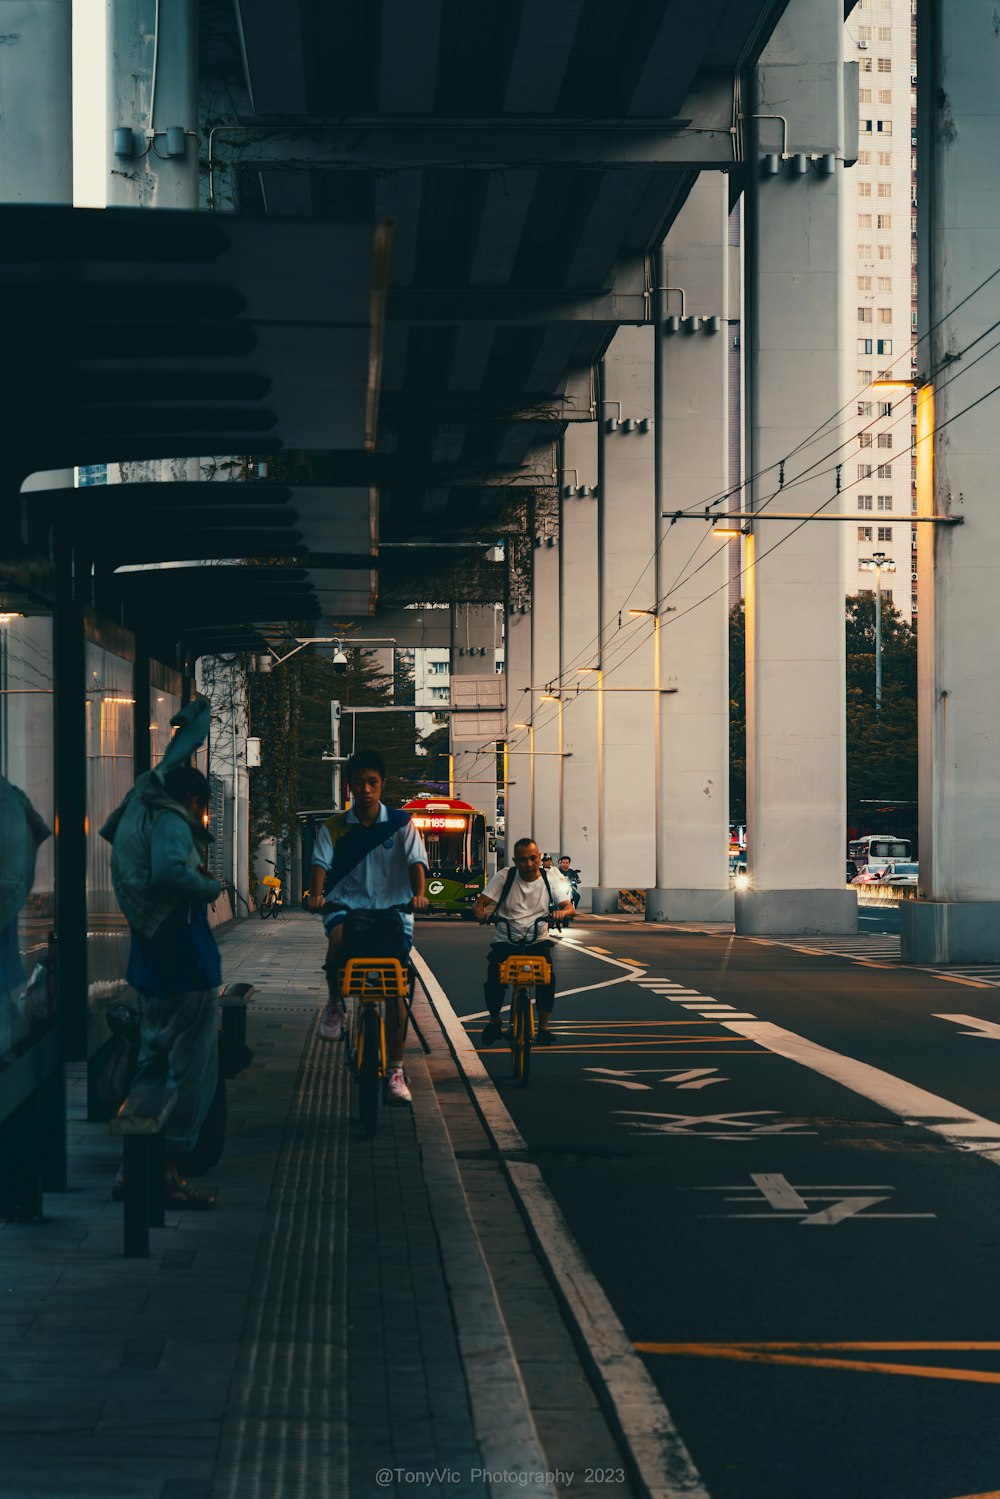 a group of people riding bikes down a street